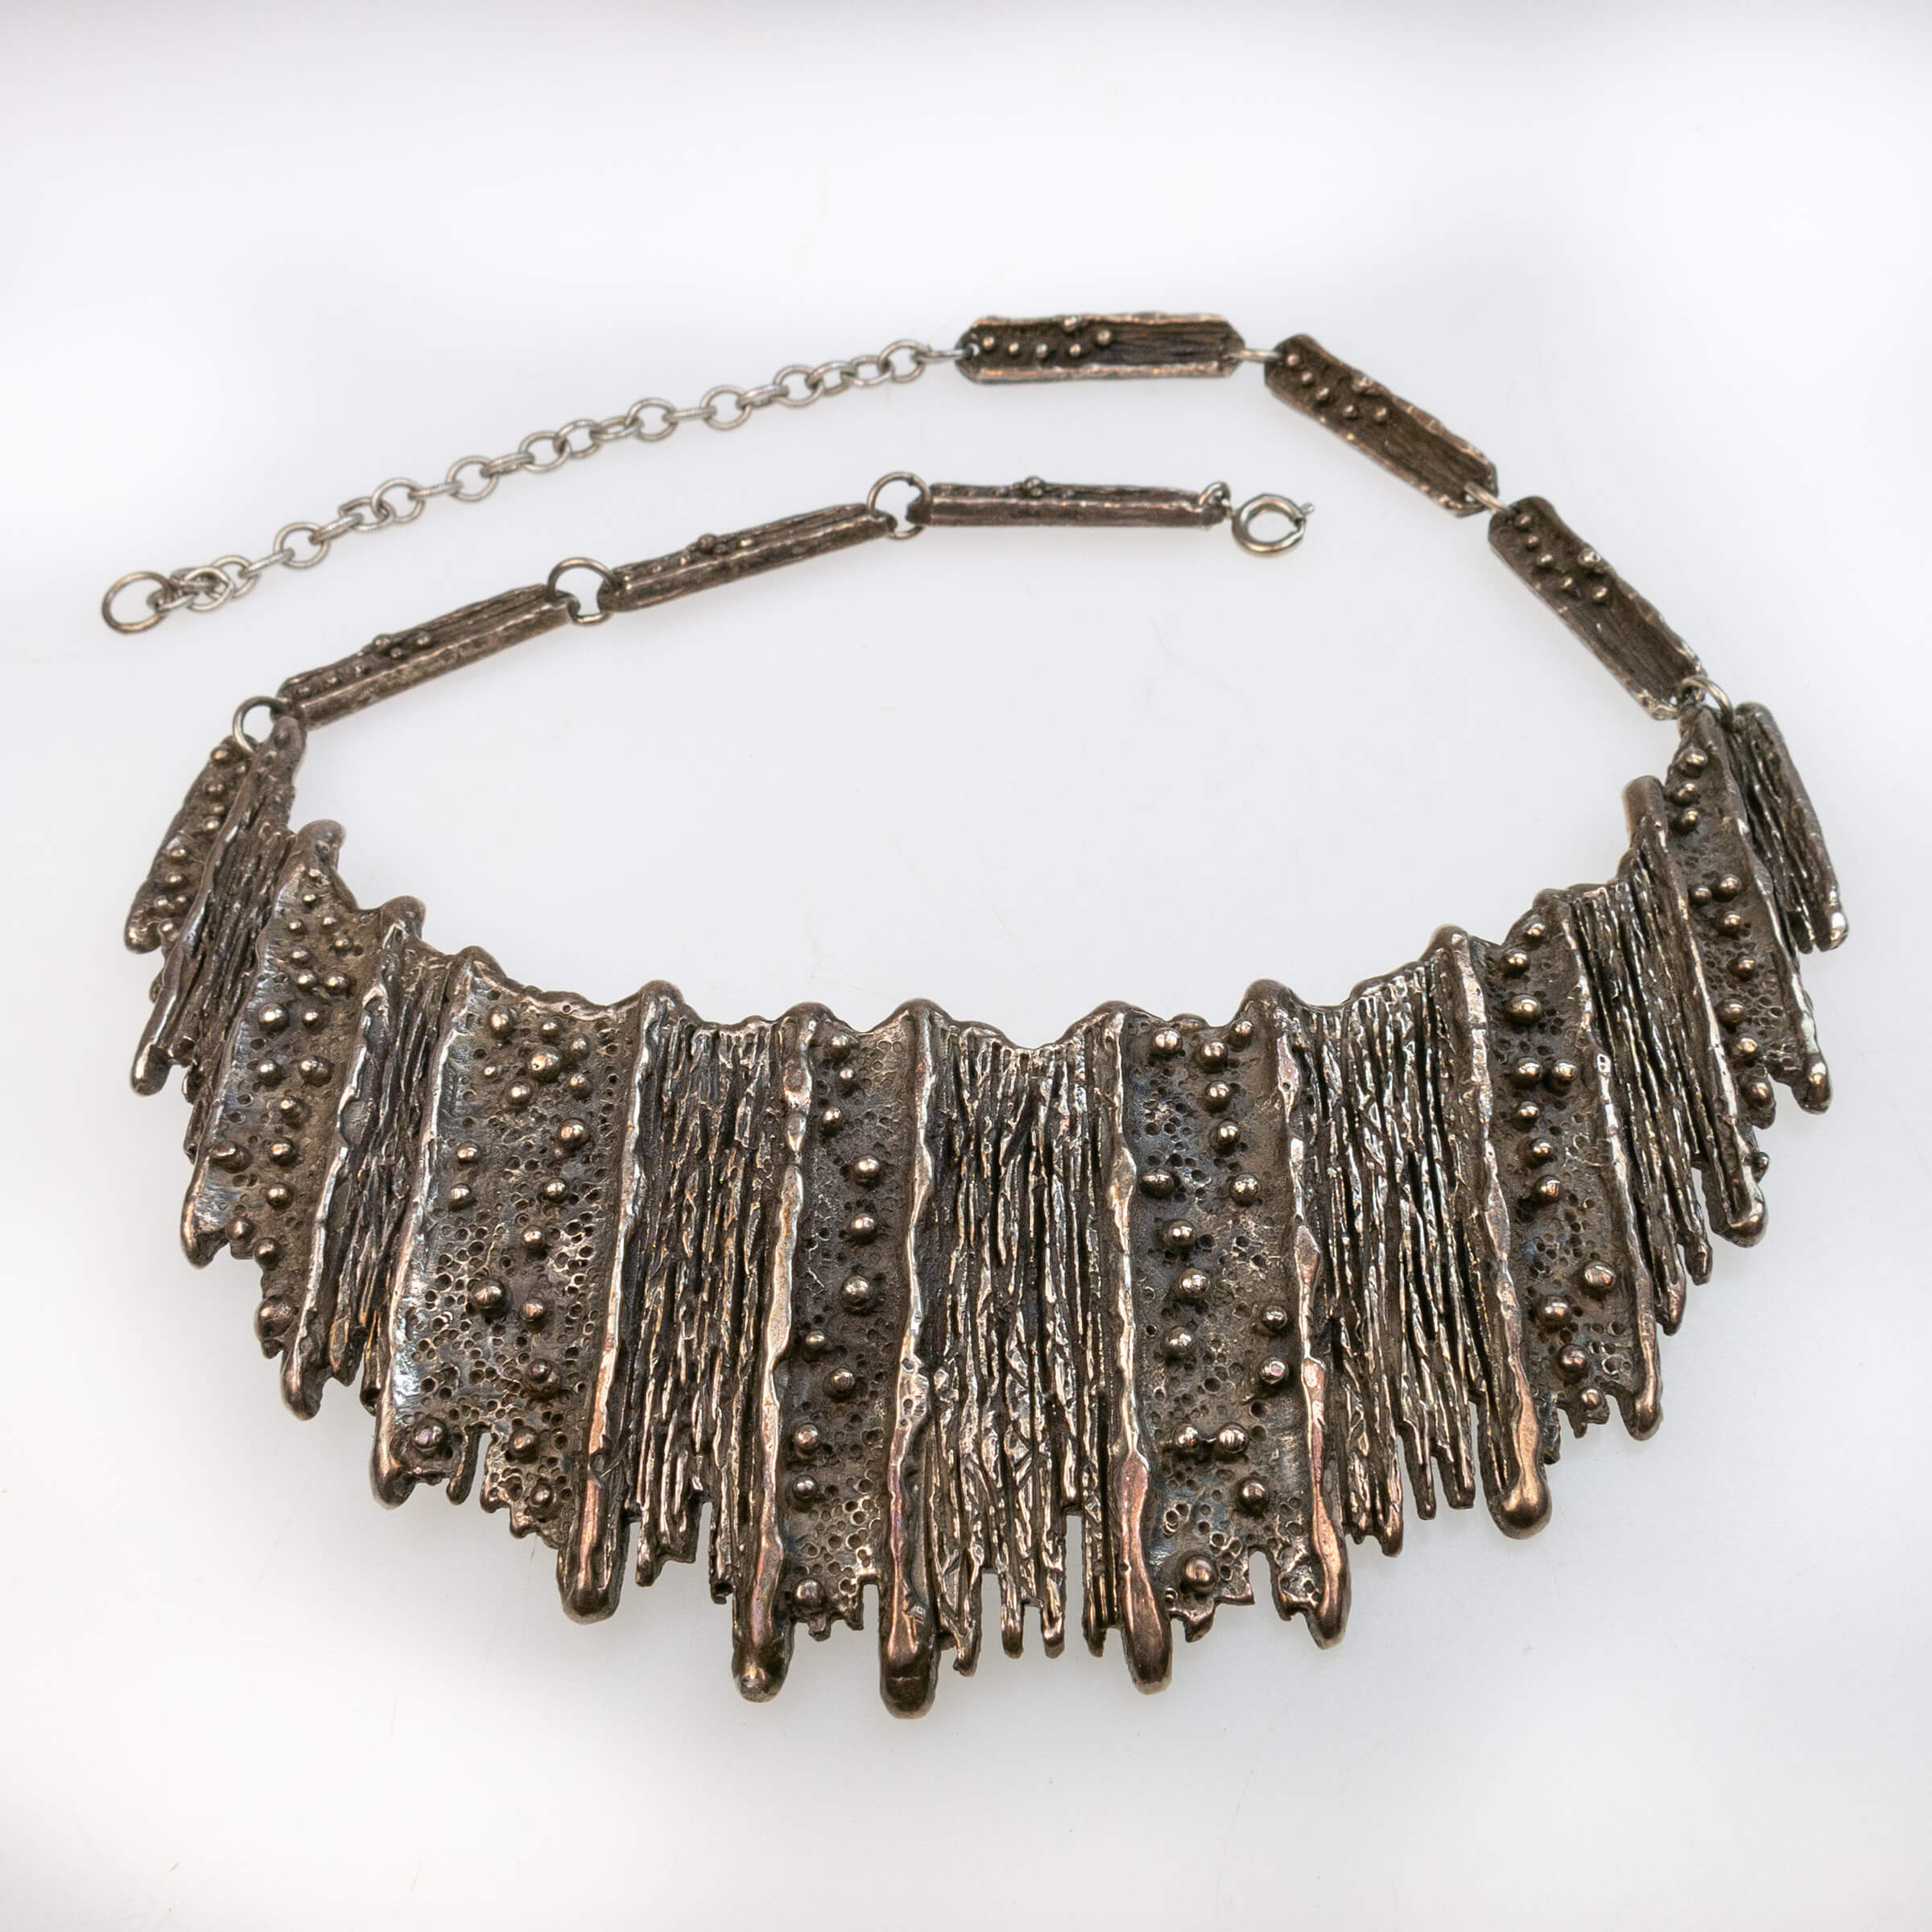 Guy Vidal Canadian Pewter Brutalist Abstract Bib Necklace